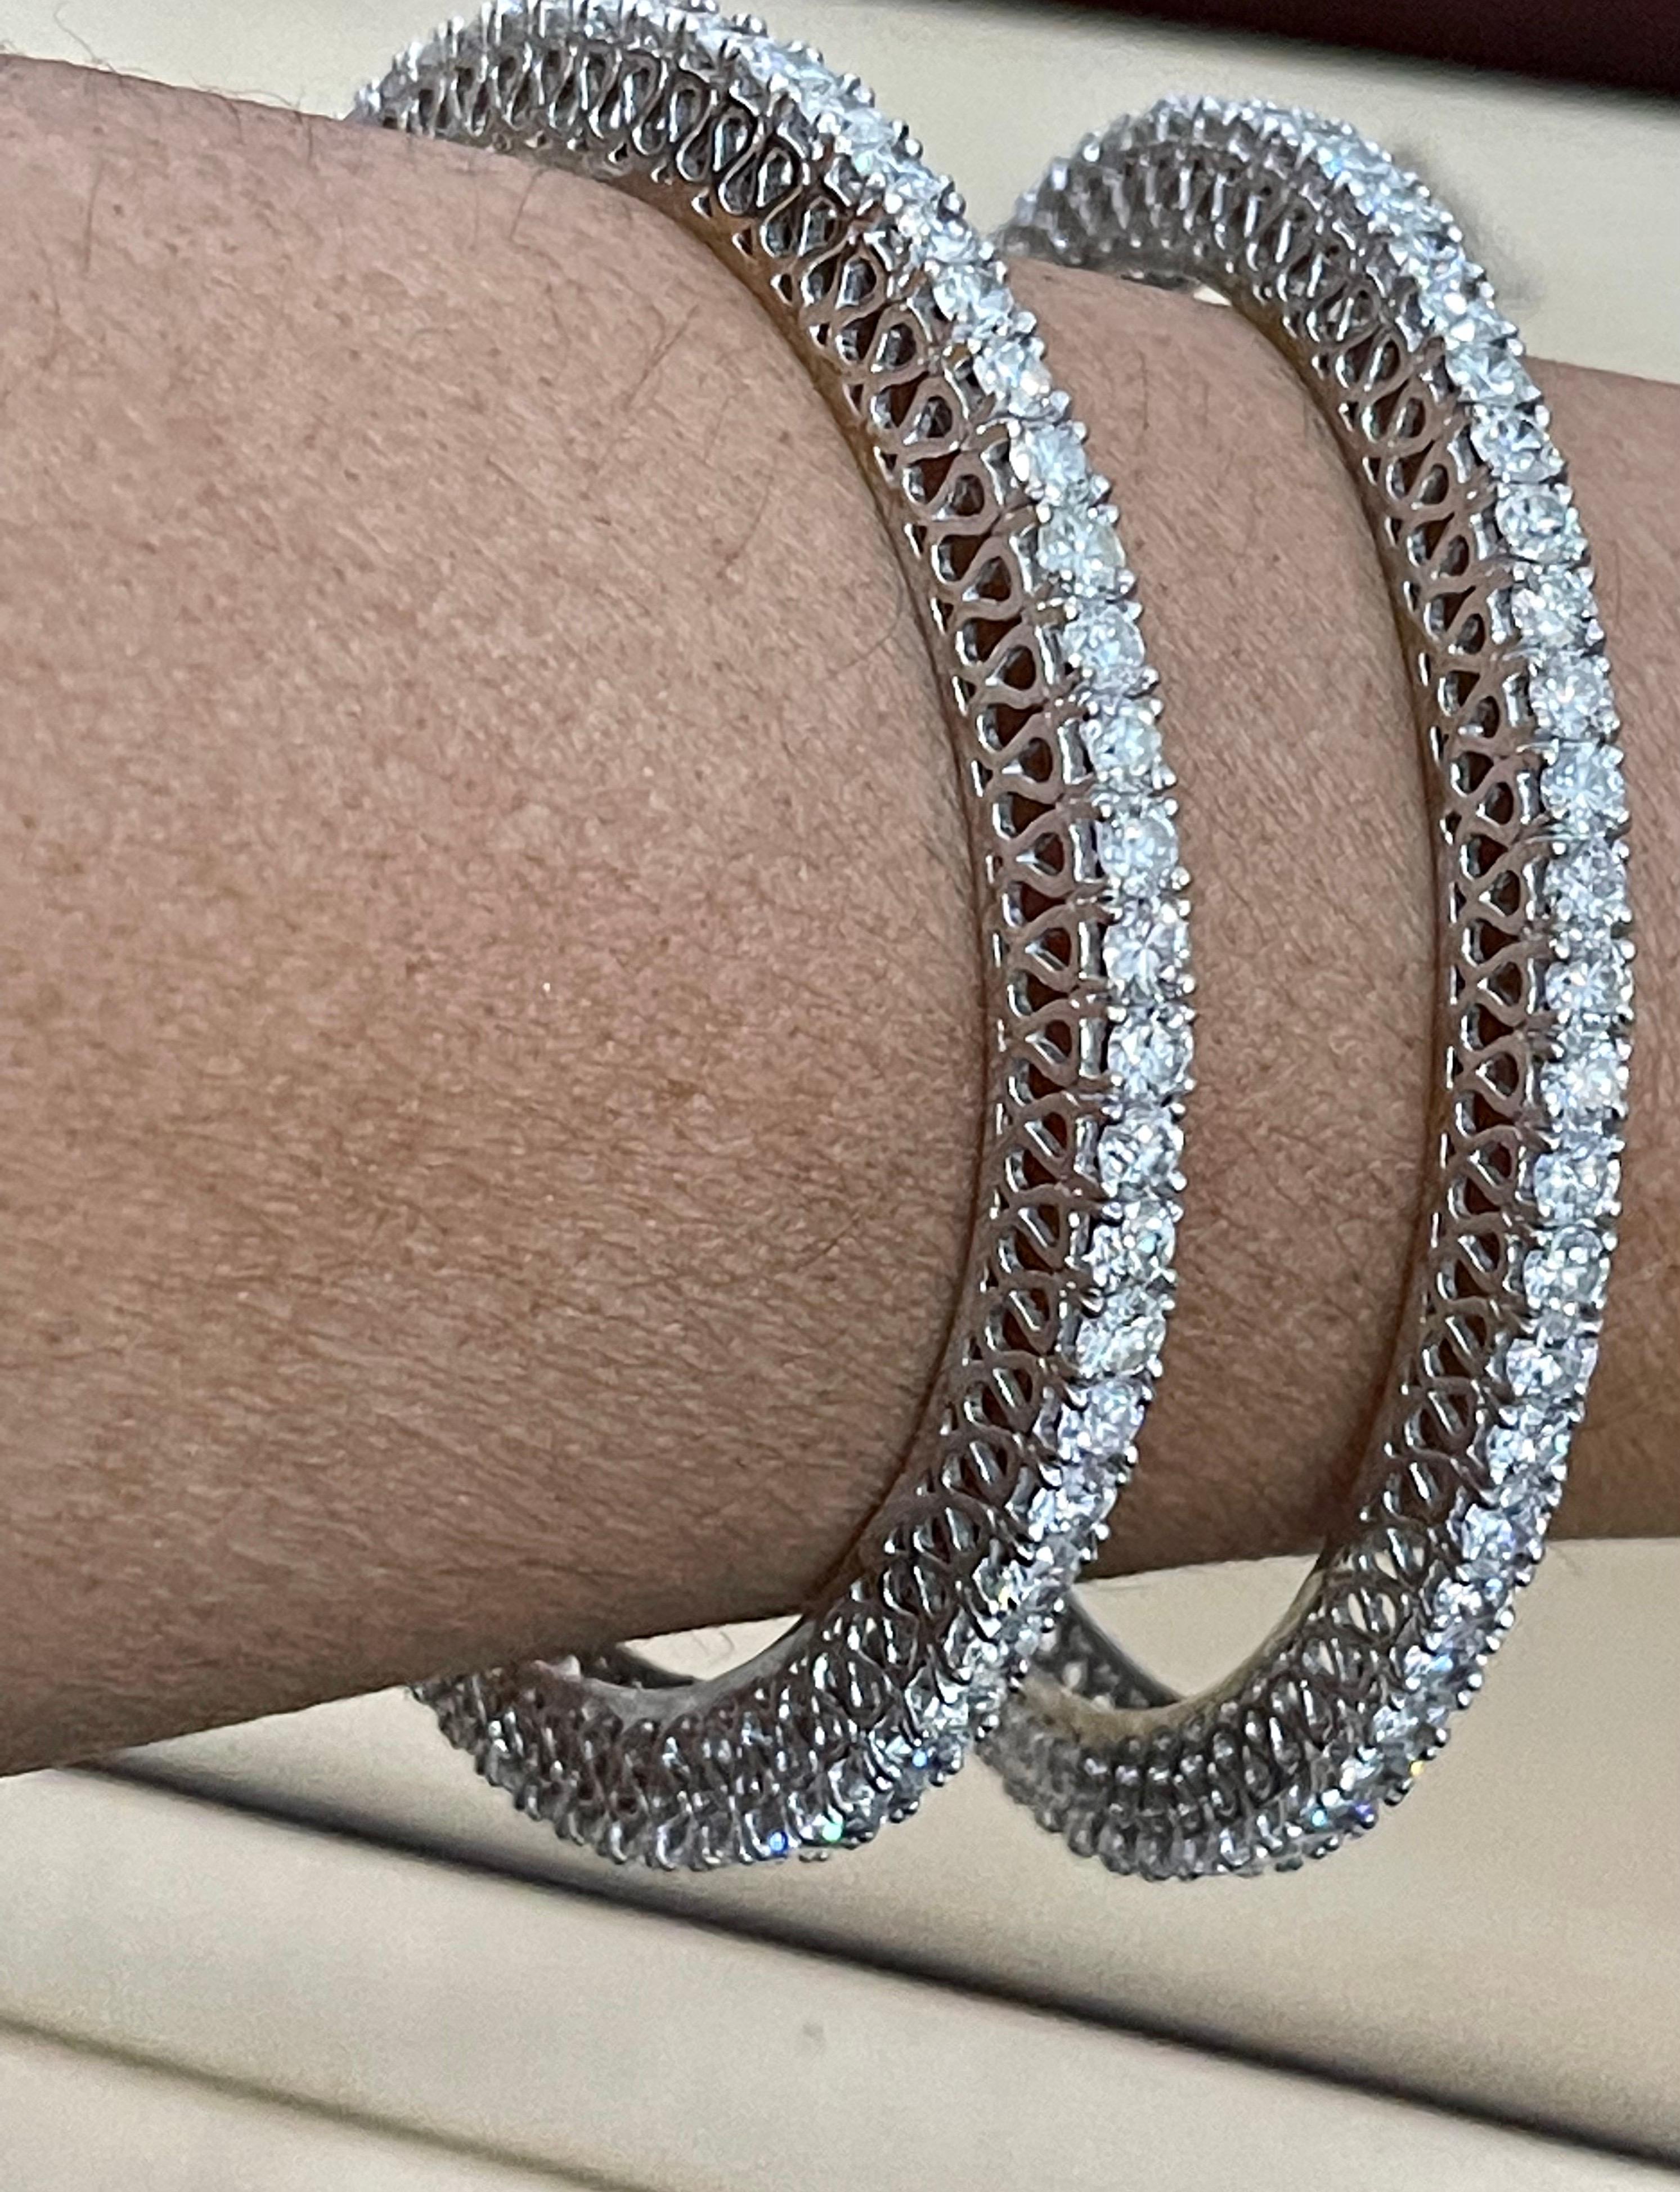 22 Pointer Each, 29 Ct Single Line Eternity 14 Kt Gold and Diamond Bangle, Pair In Excellent Condition For Sale In New York, NY